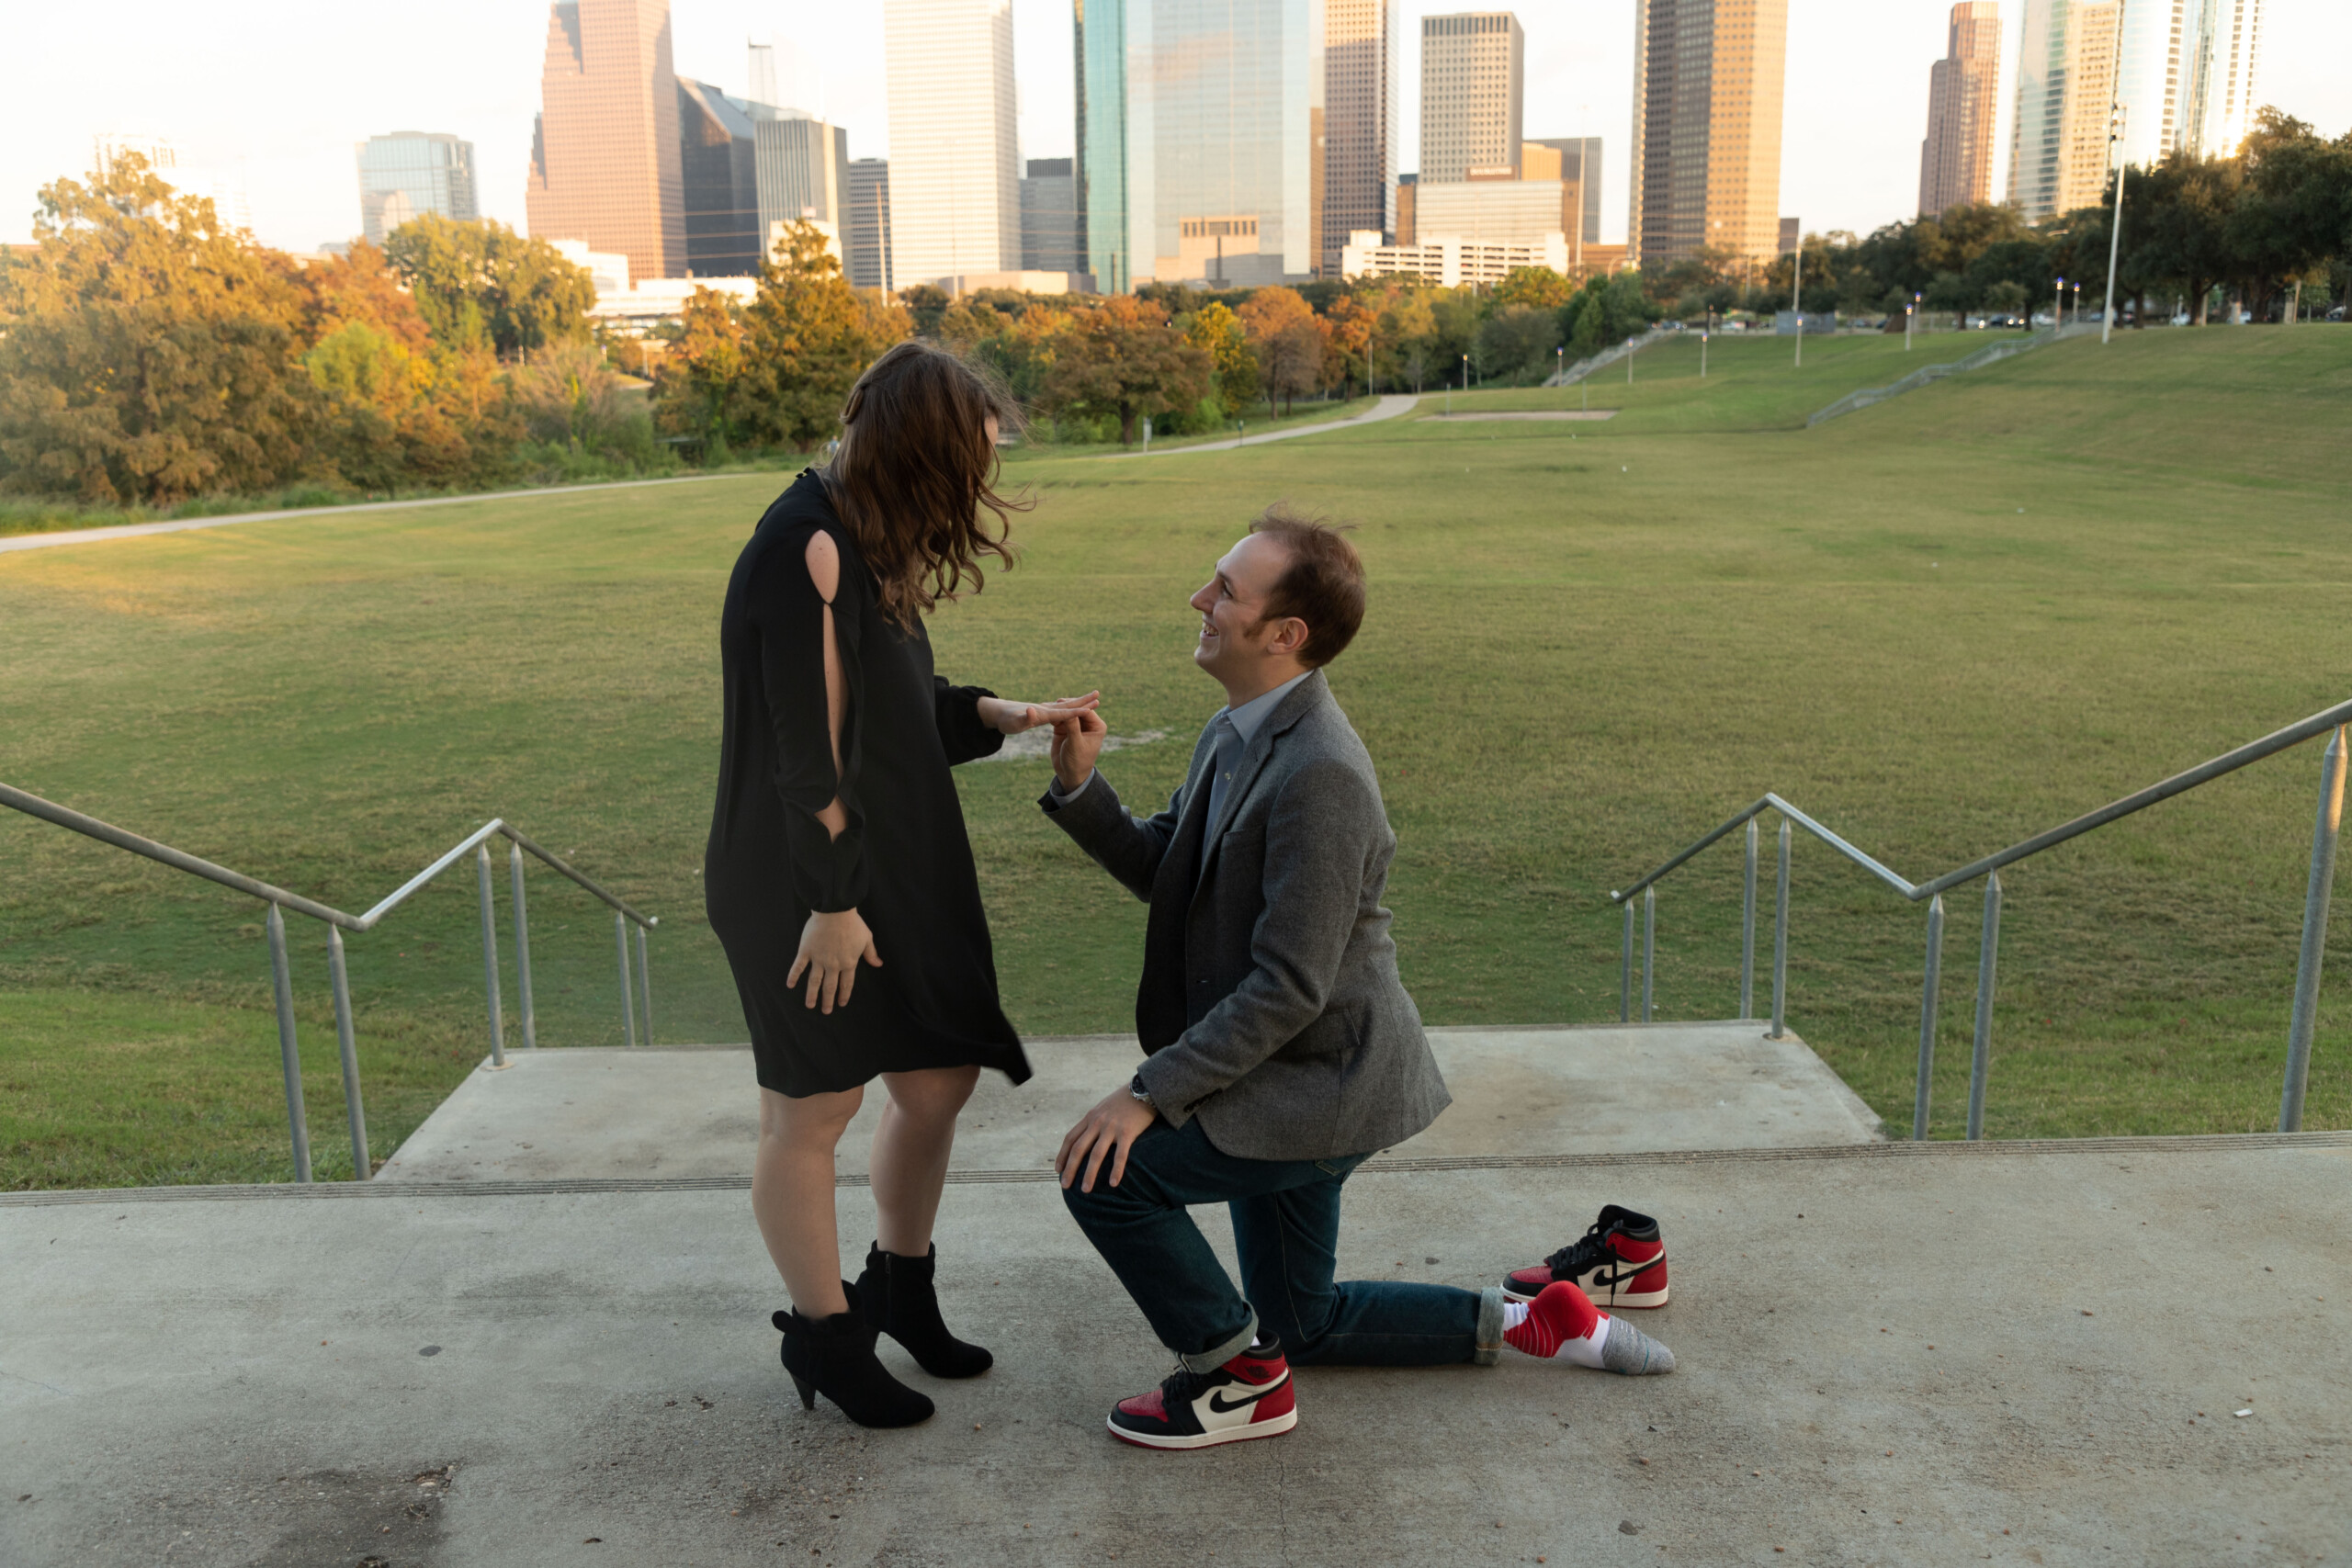 Proposal photoshoot by Jab, Localgrapher in Houston